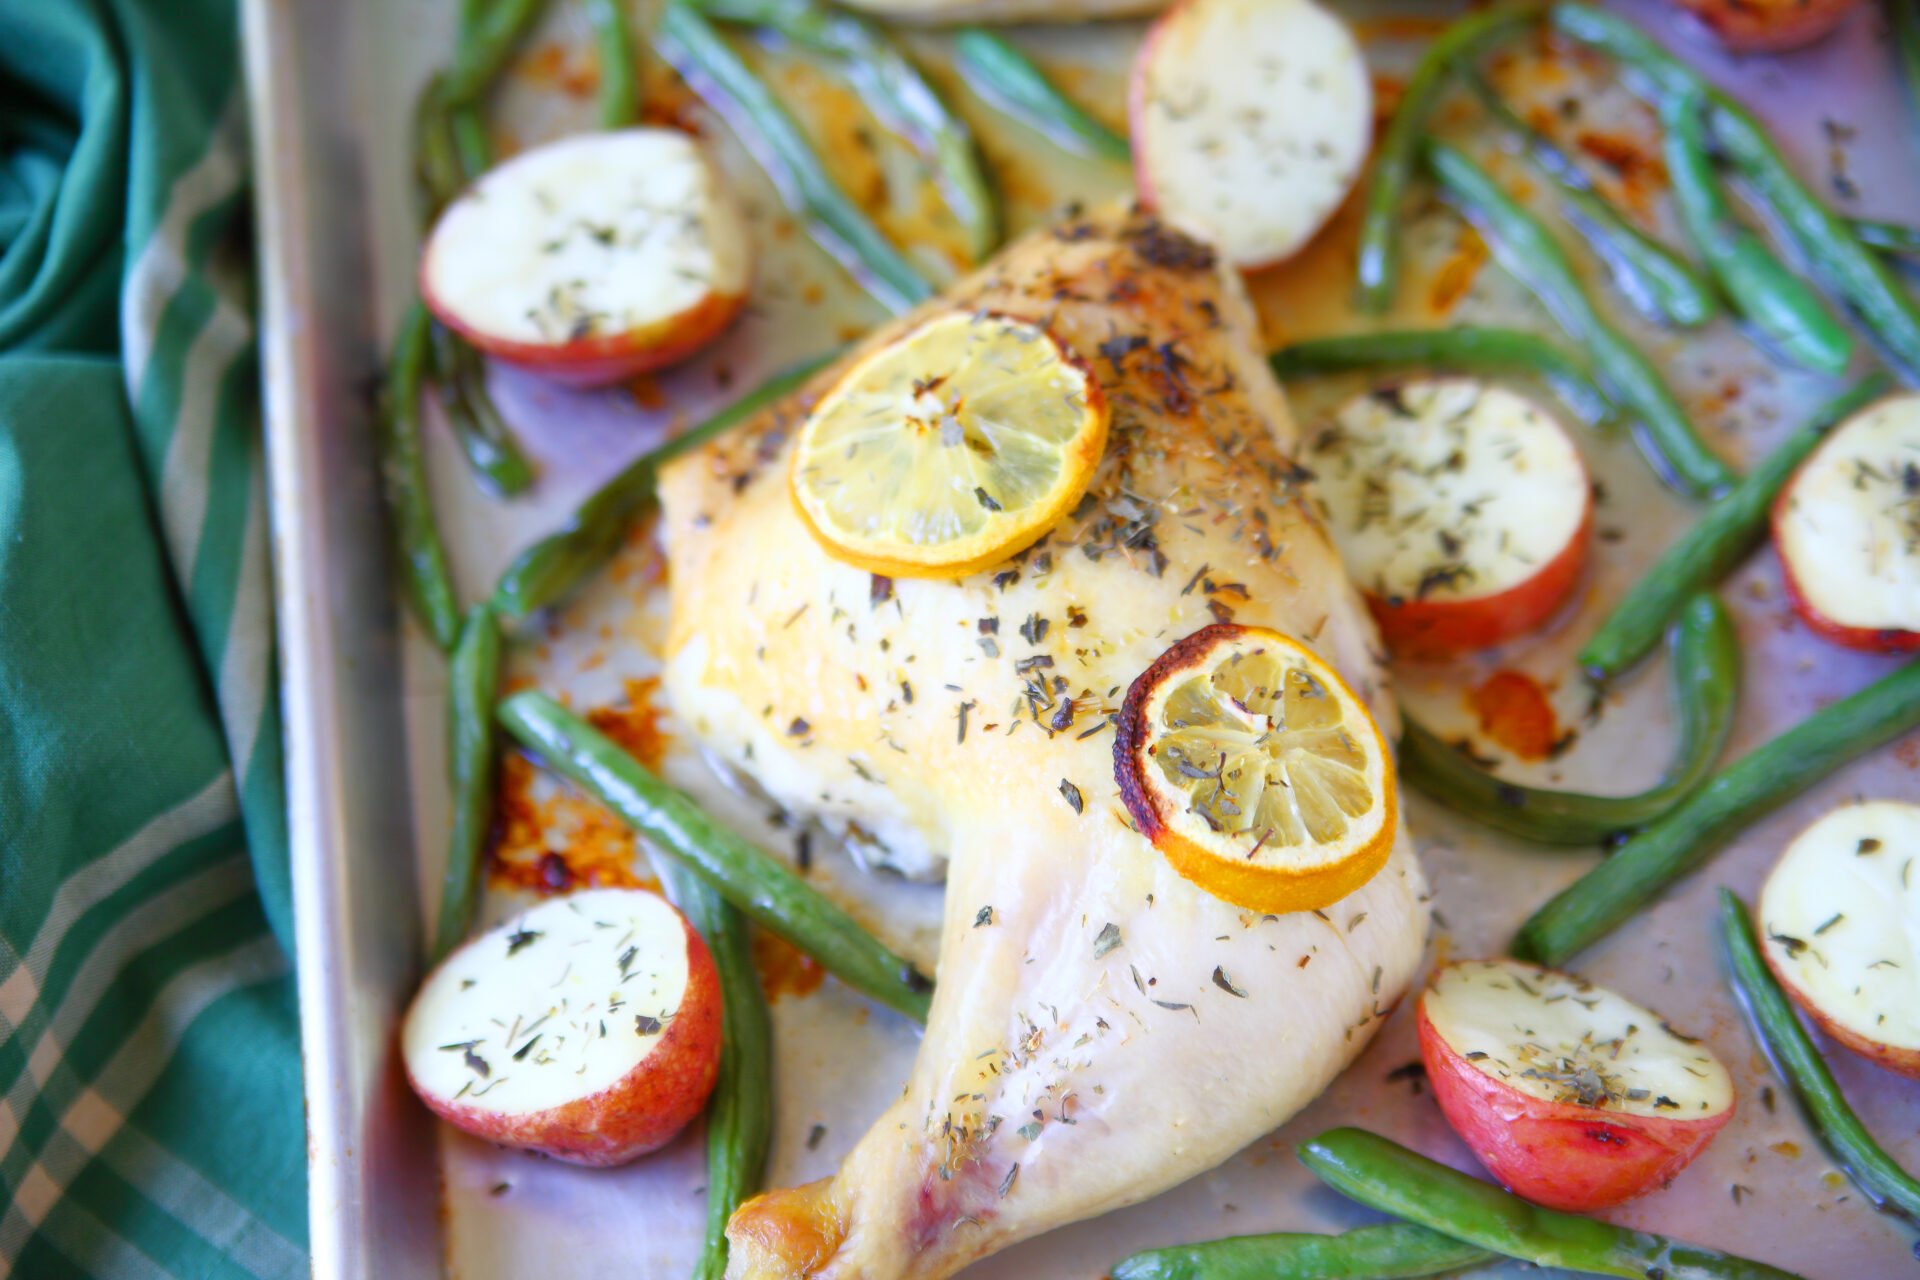 Sheet pan meal of chicken, potatoes and green beans with lemon slices